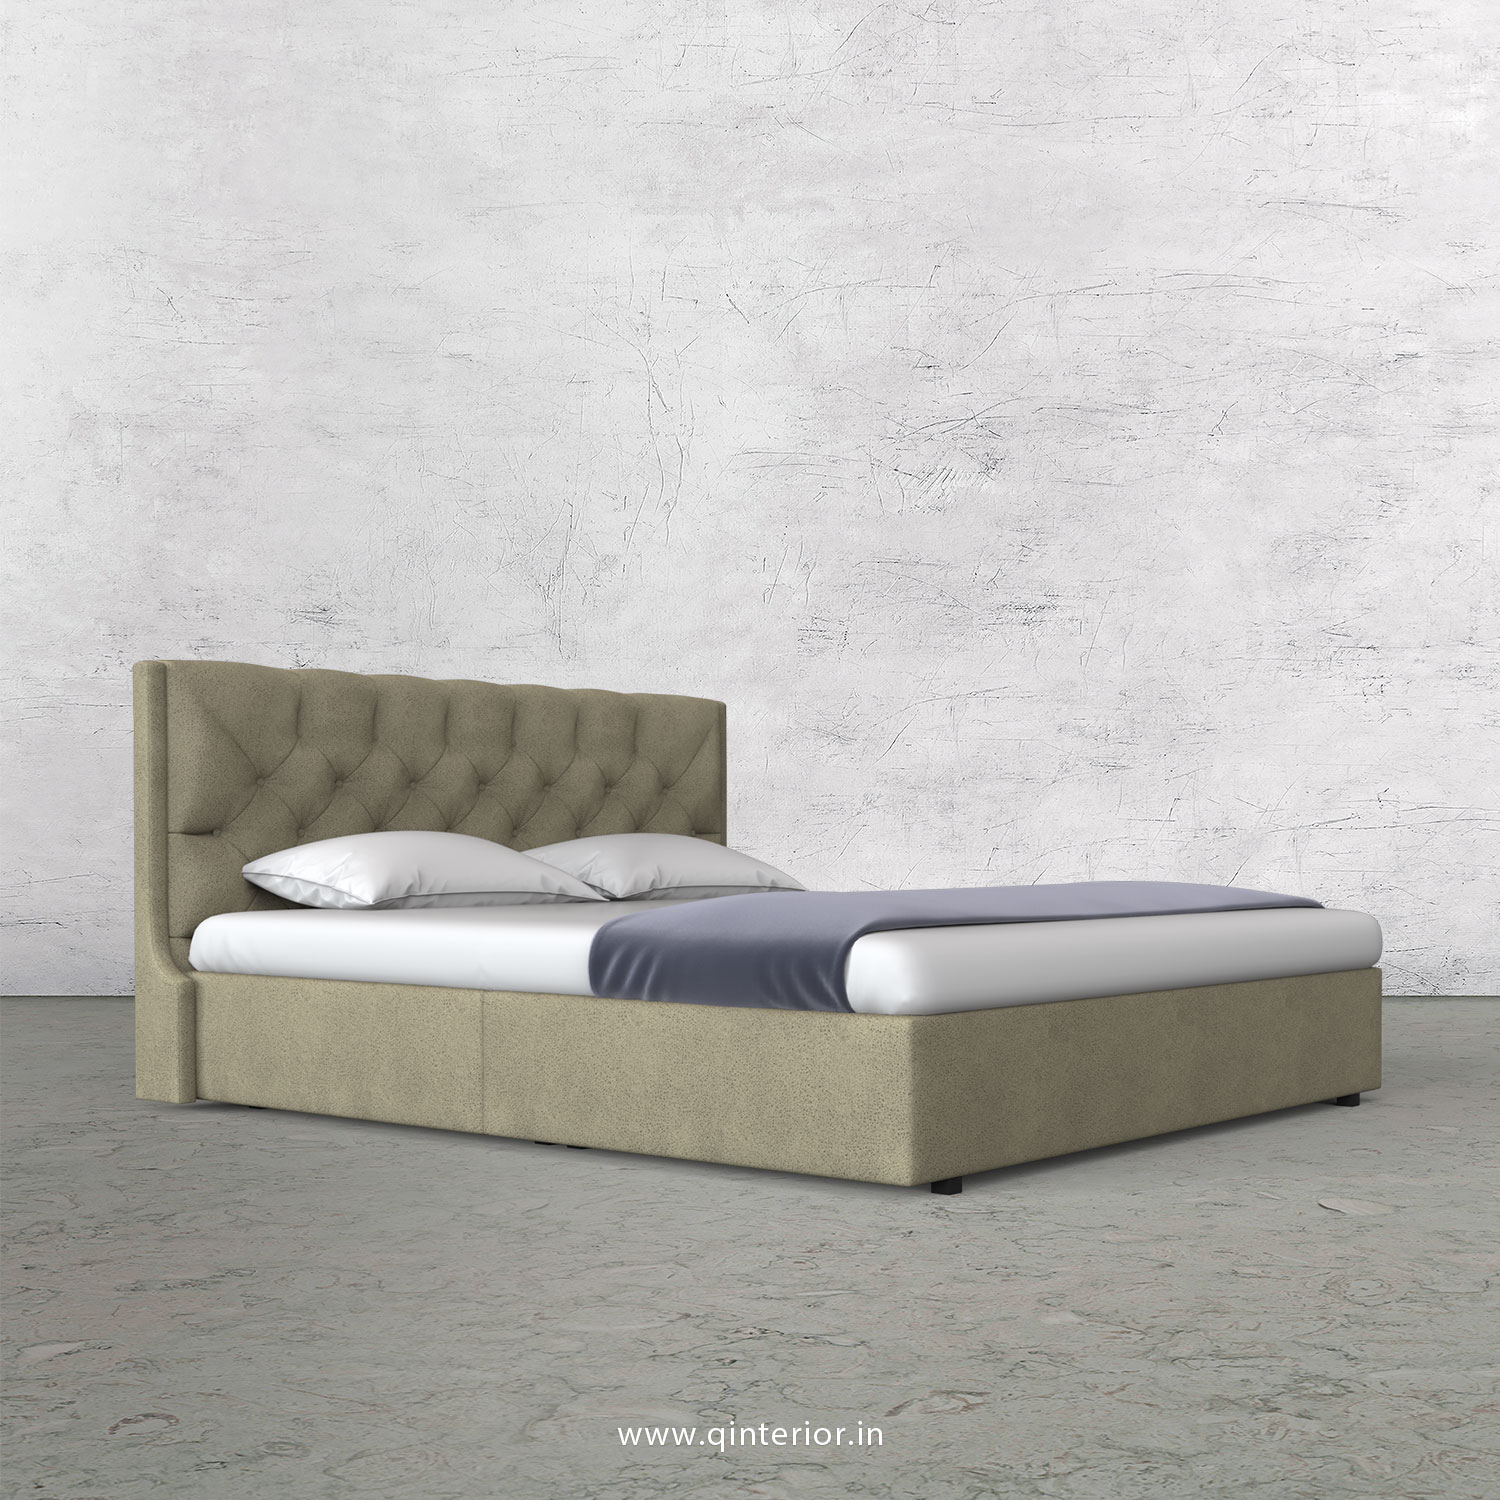 Scorpius King Size Bed in Fab Leather Fabric - KBD009 FL10